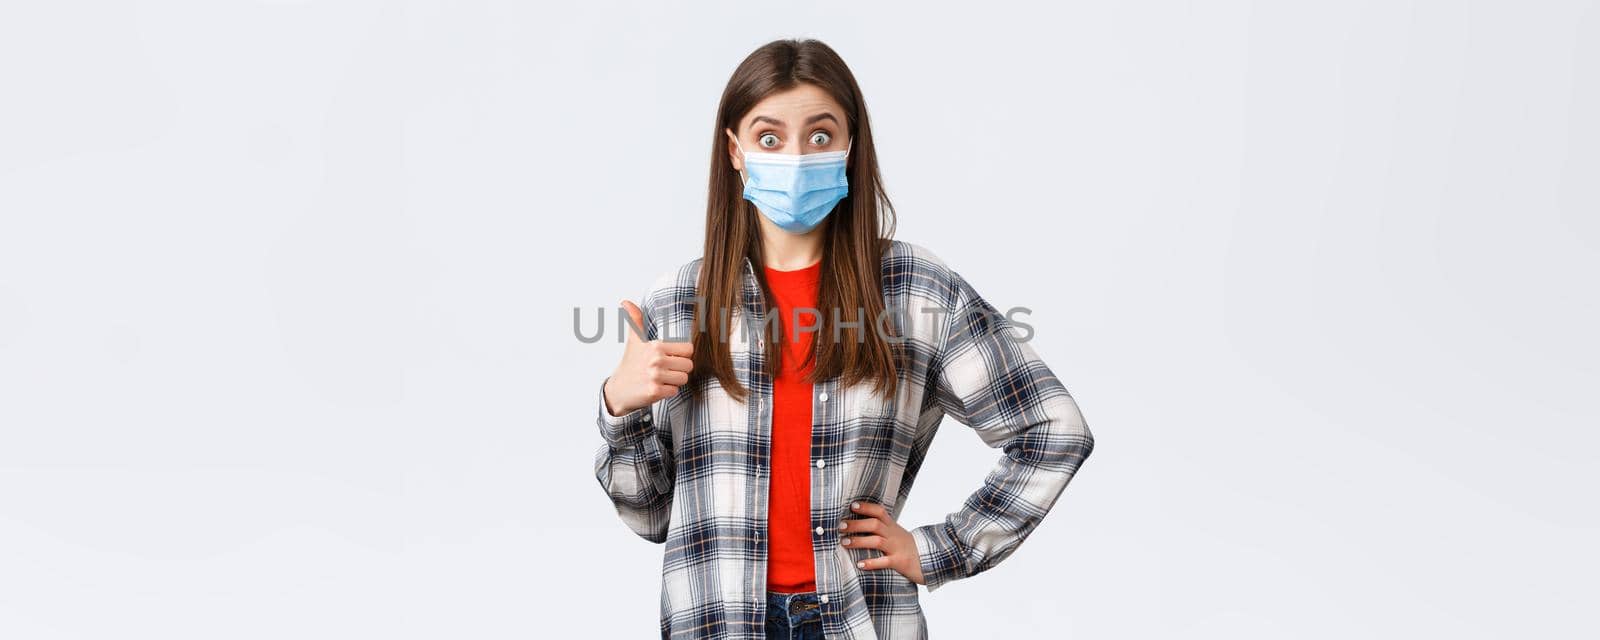 Coronavirus outbreak, leisure on quarantine, social distancing and emotions concept. Excited and surprised young woman in medical mask hear really good idea, show thumb-up in approval.